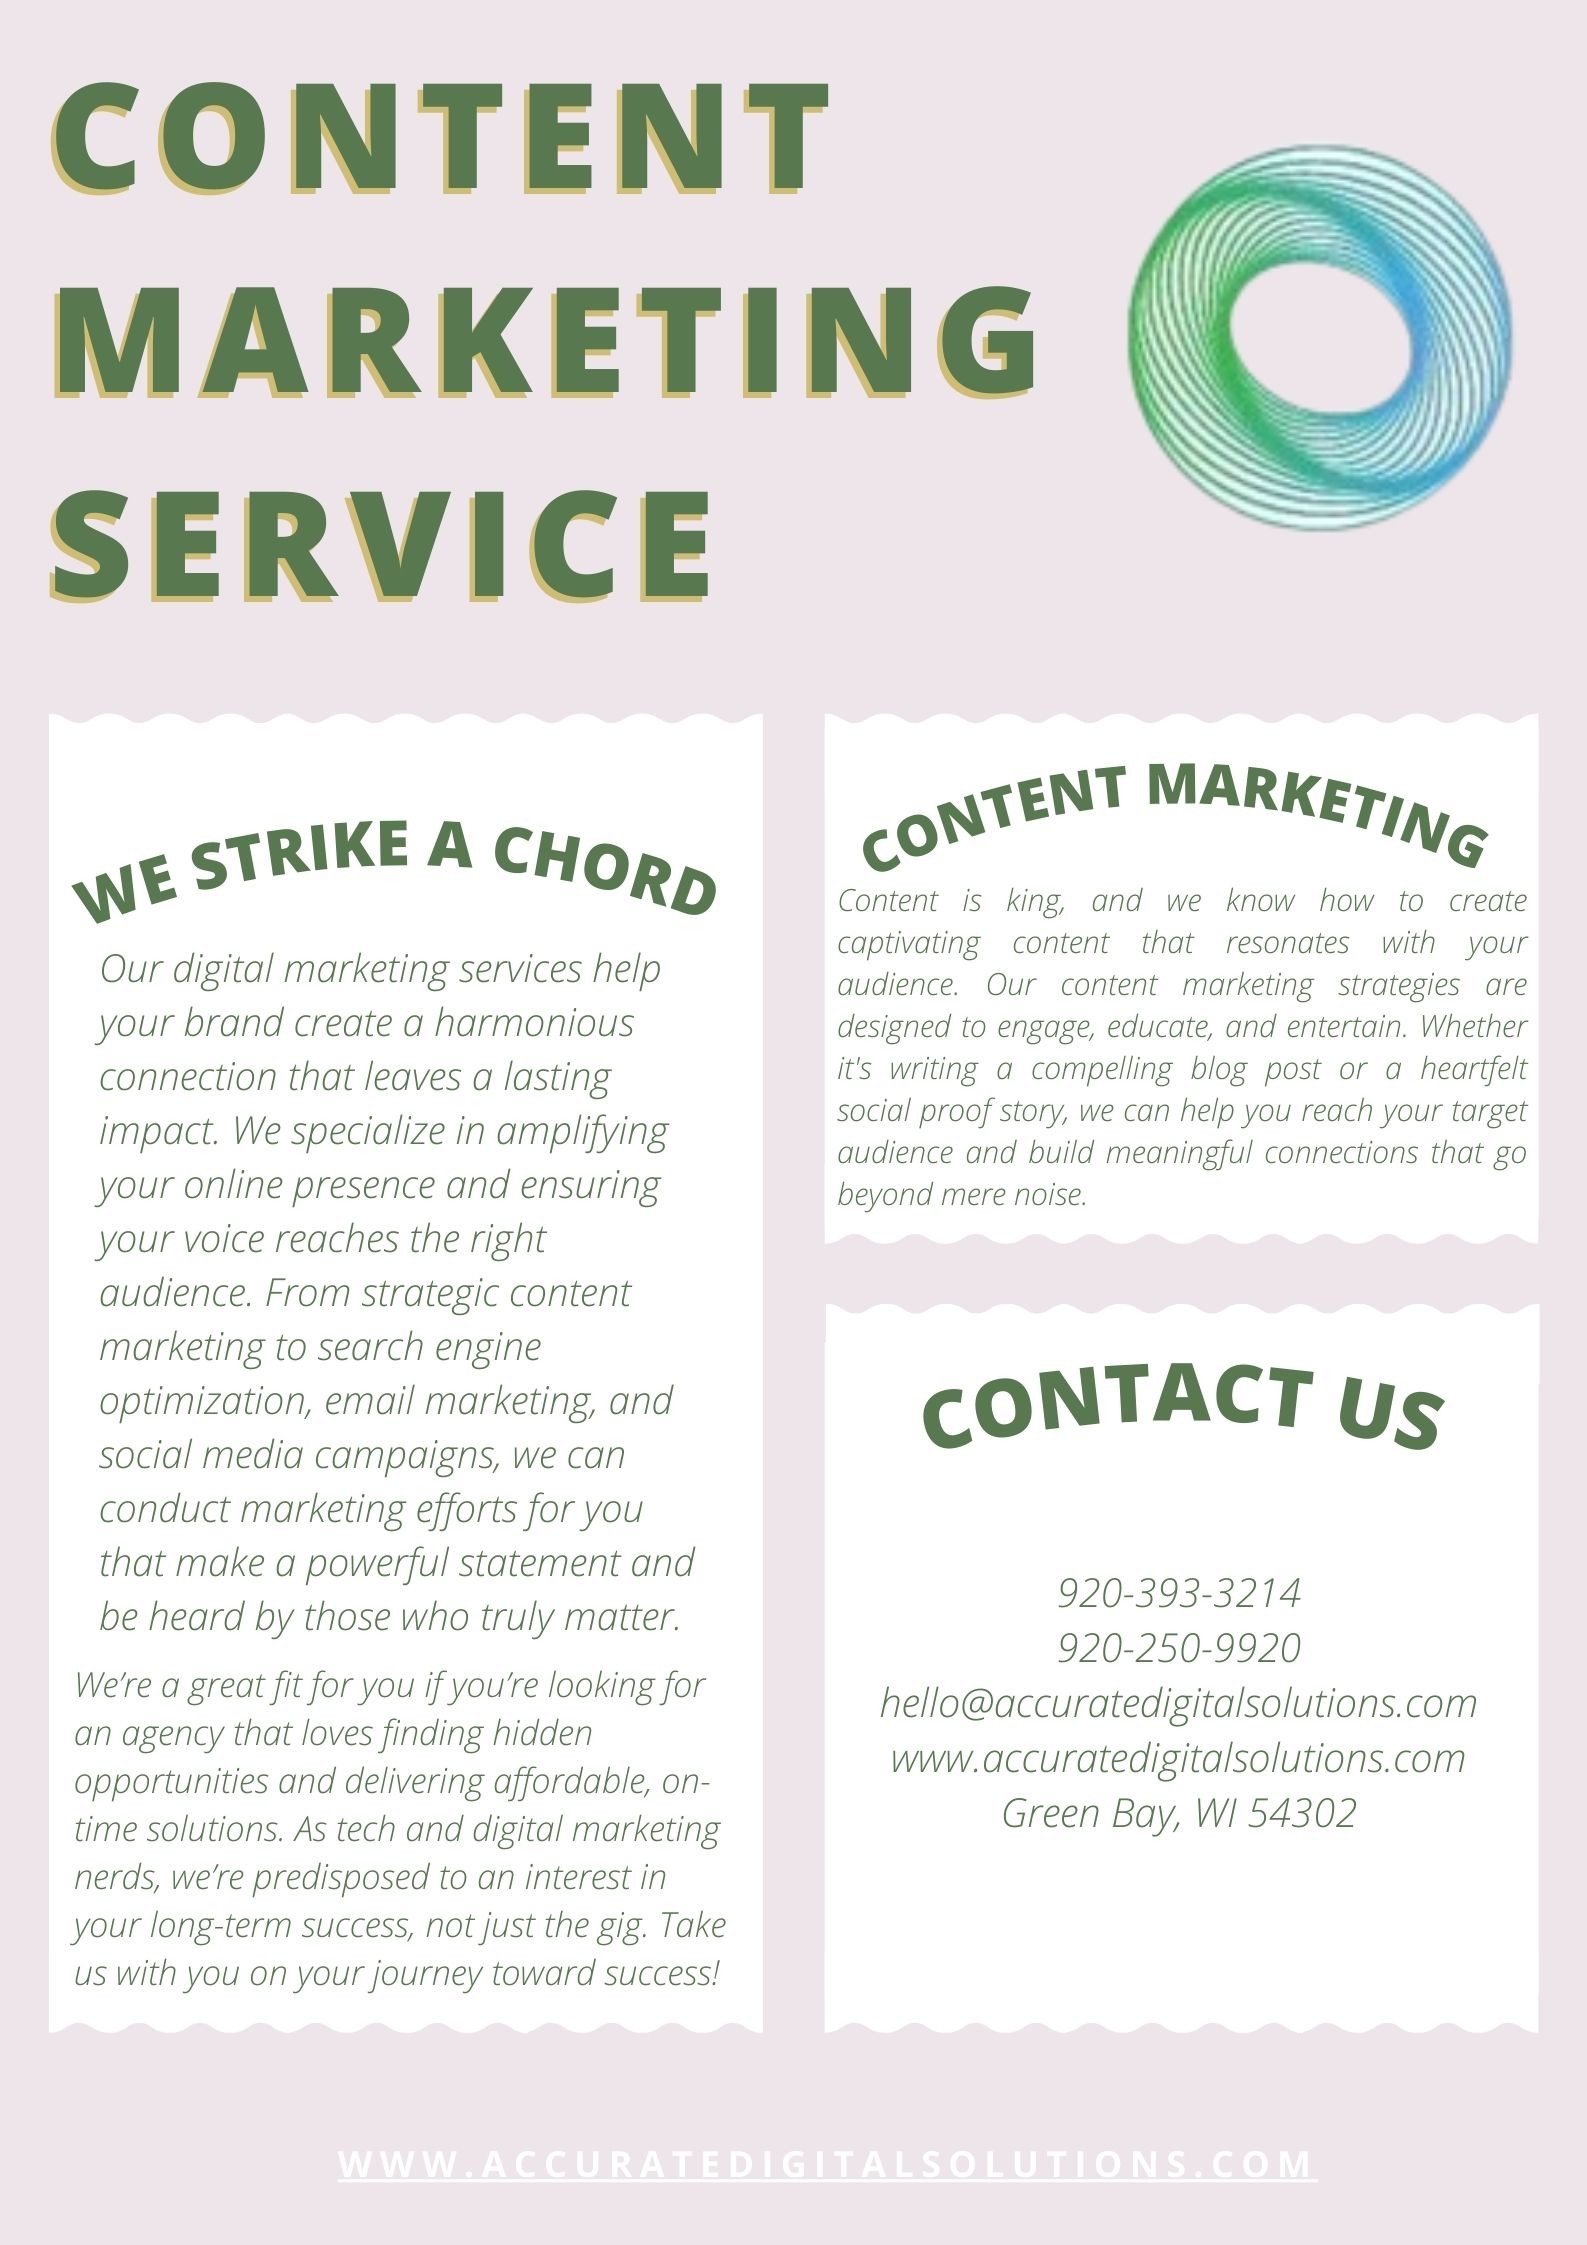 Content Marketing Service - Accurate Digital Solutions